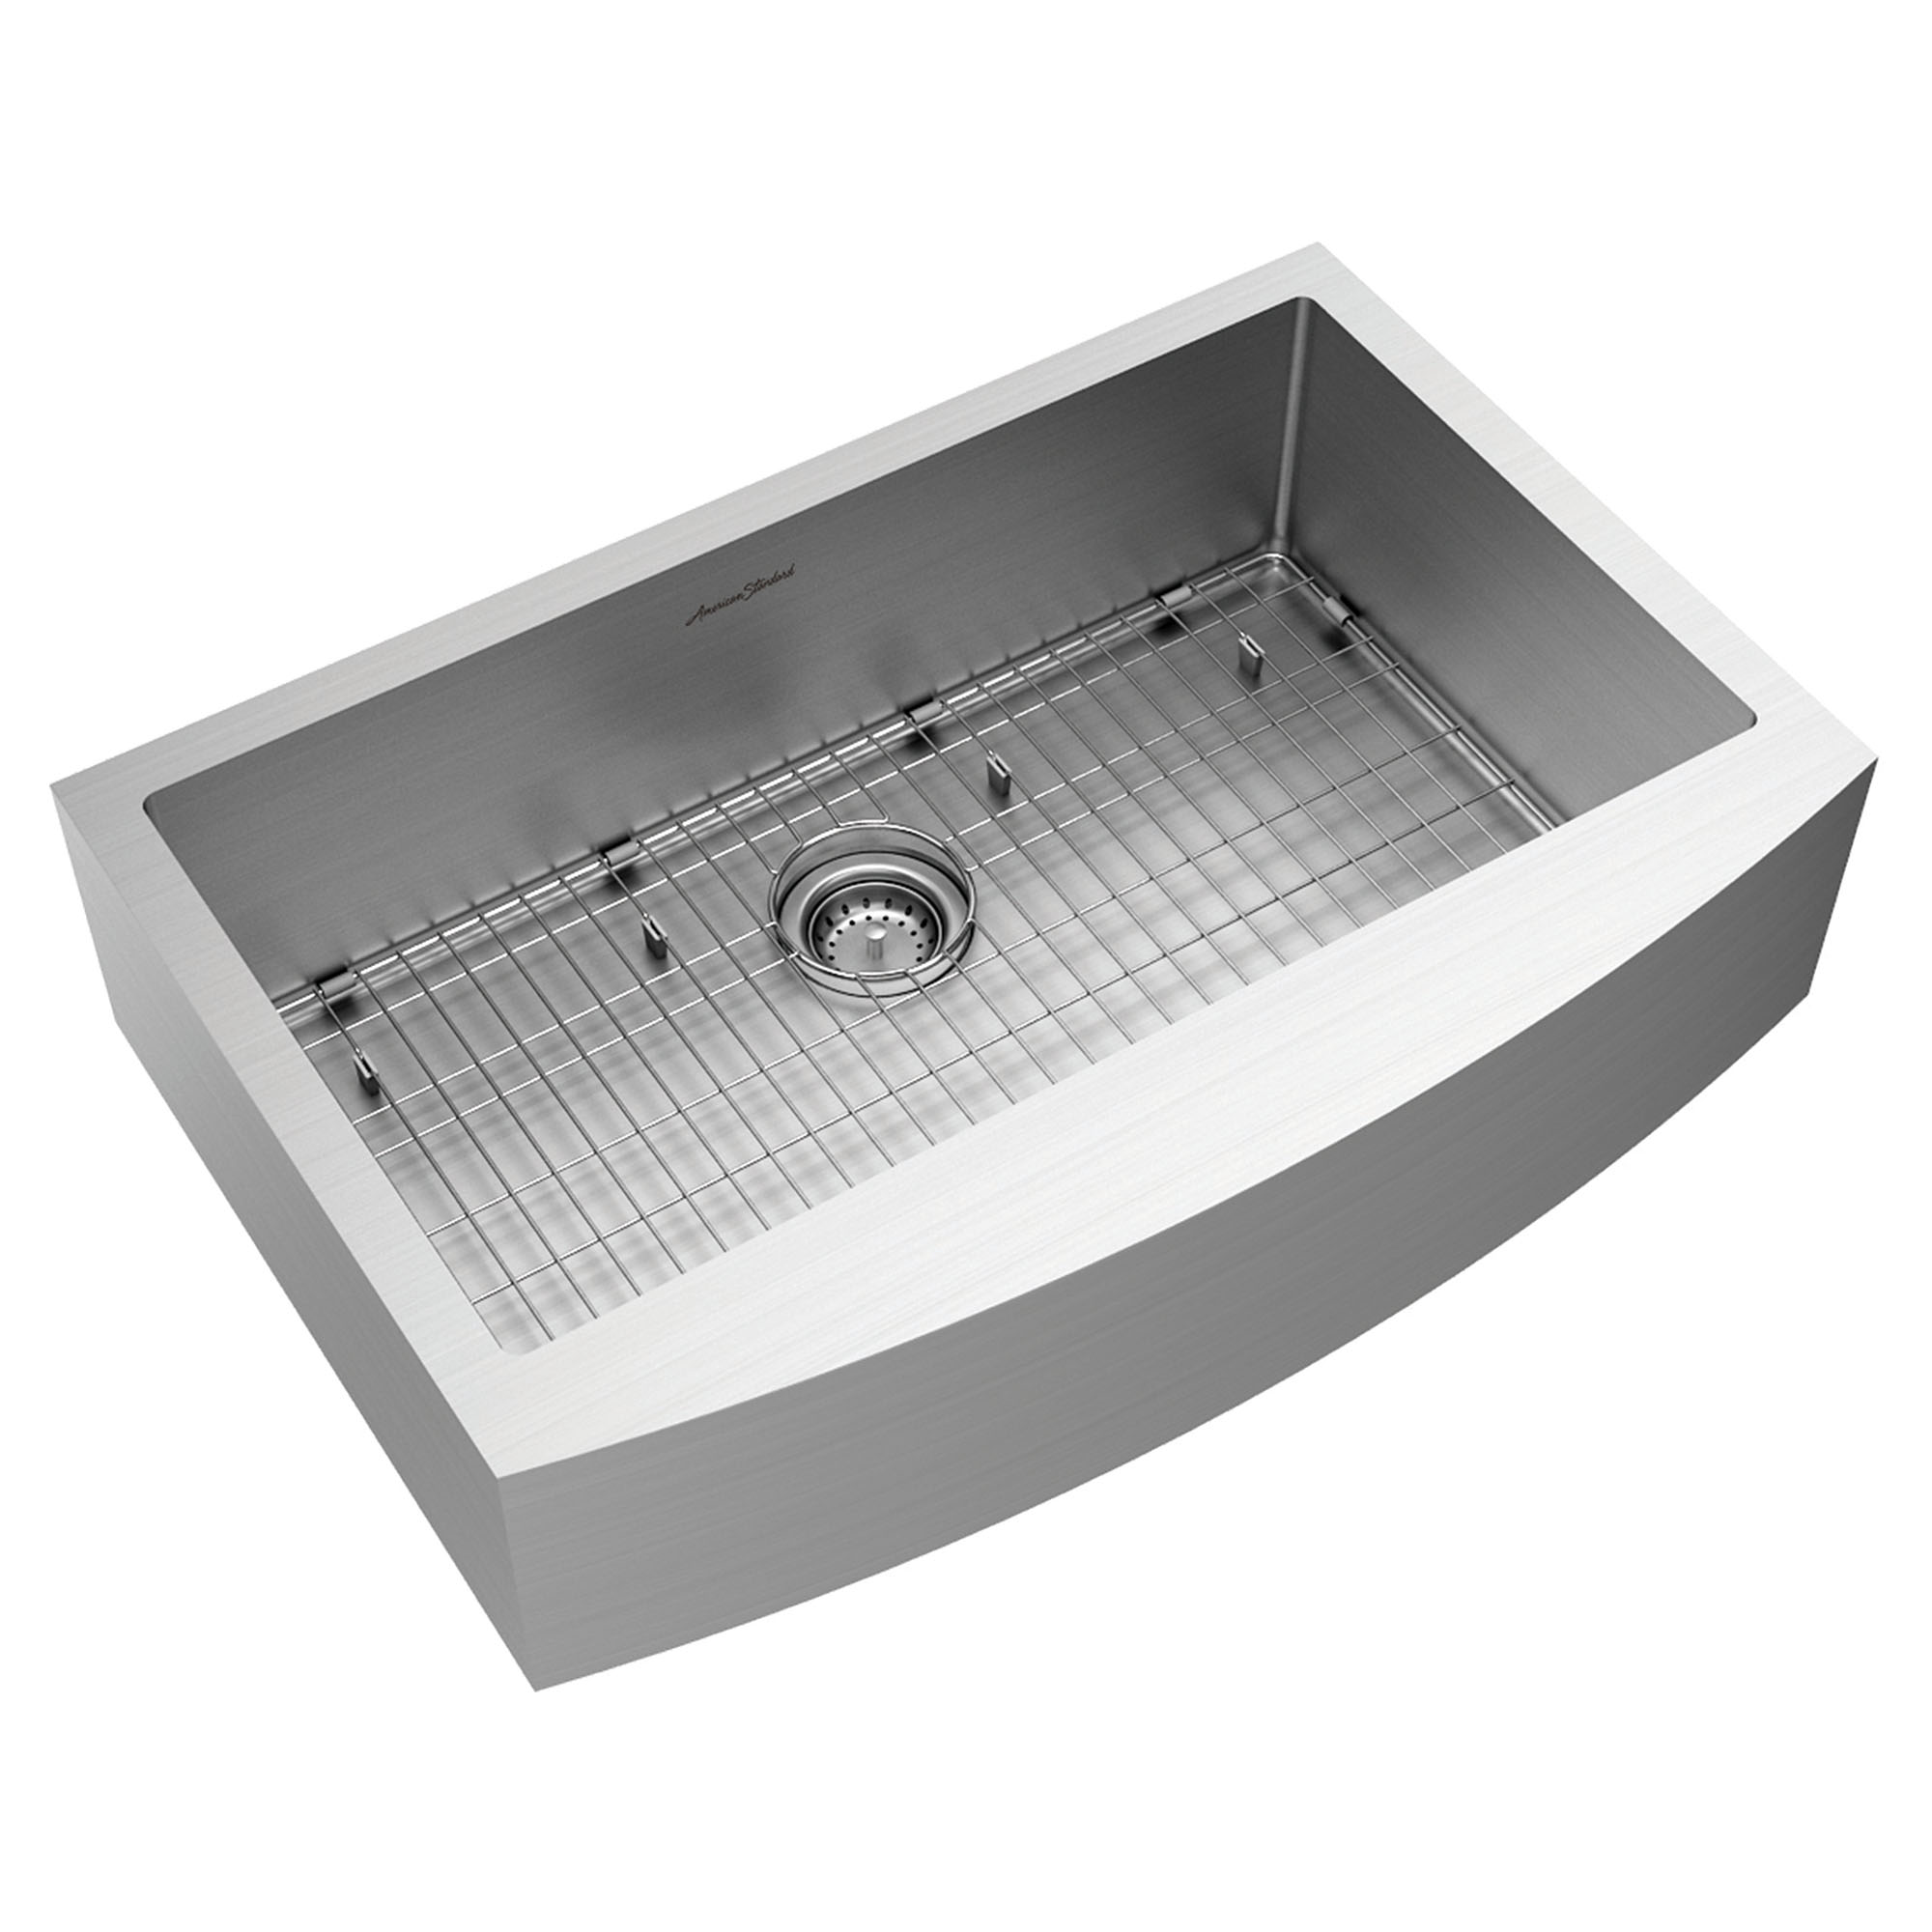 American Standard Pekoe Farmhouse/Apron-Front Stainless Steel 33 in. Single Bowl Kitchen Sink - image 2 of 6